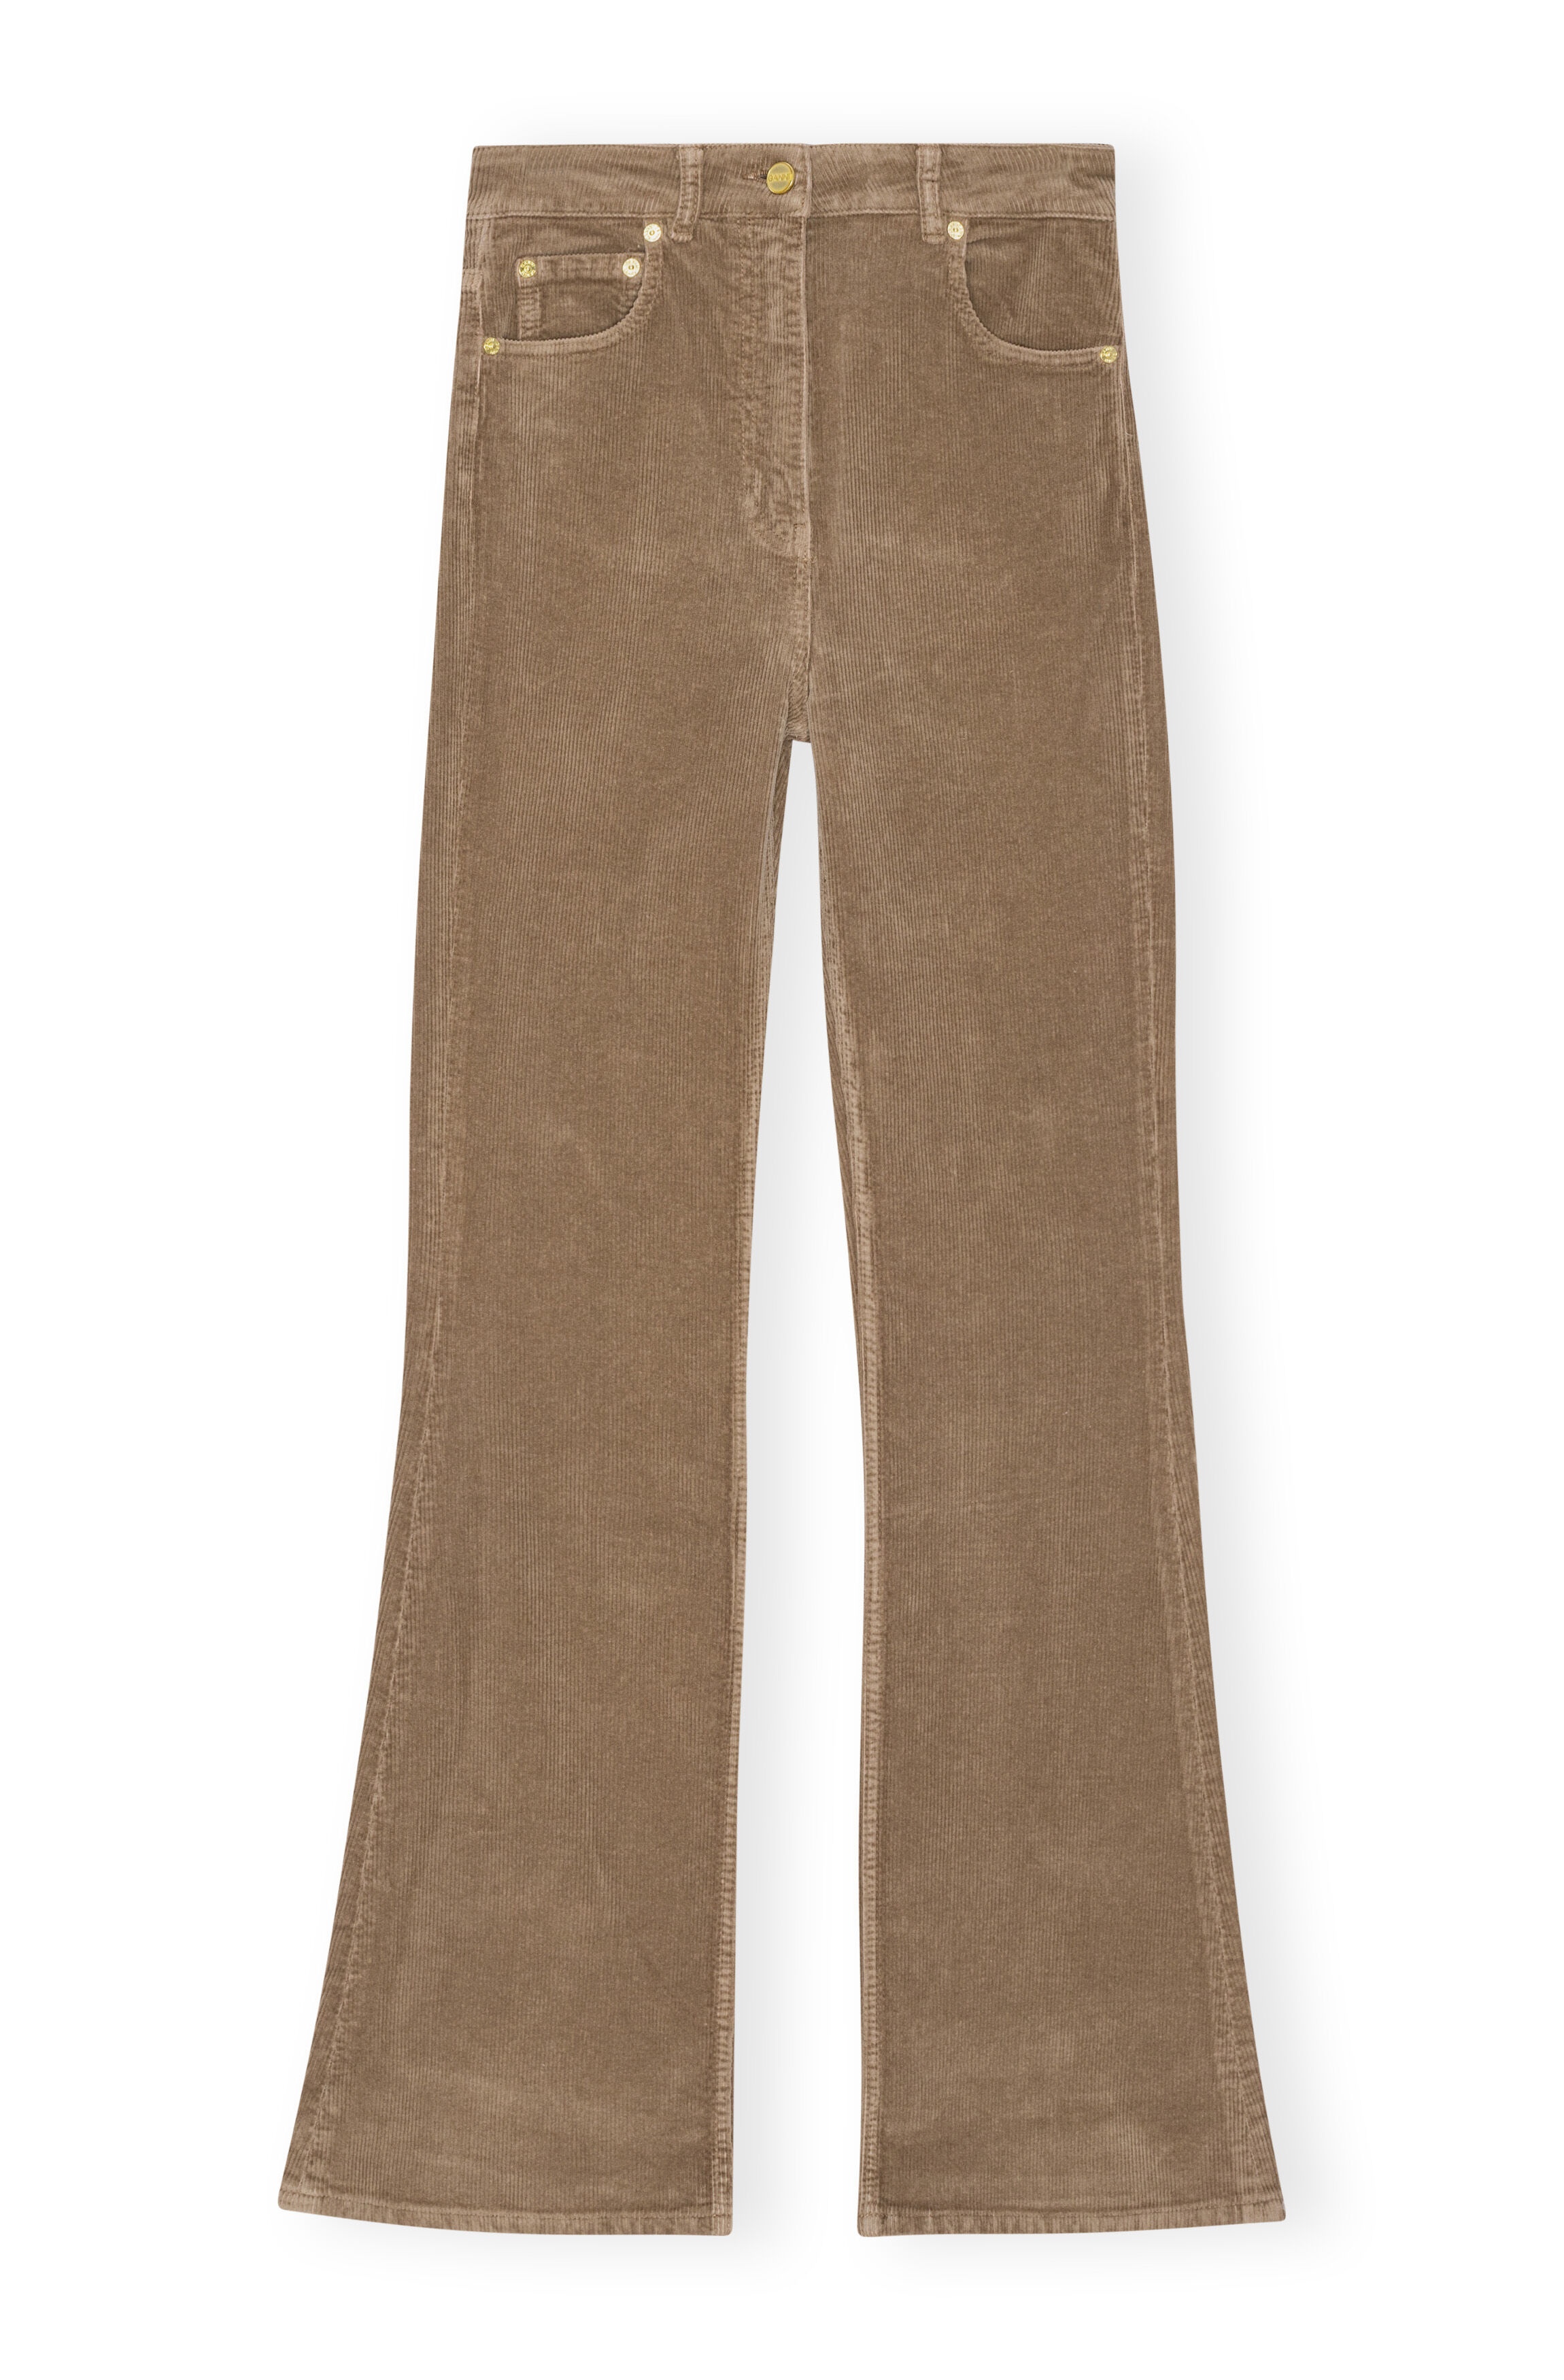 BROWN WASHED CORDUROY IRY TROUSERS - 1